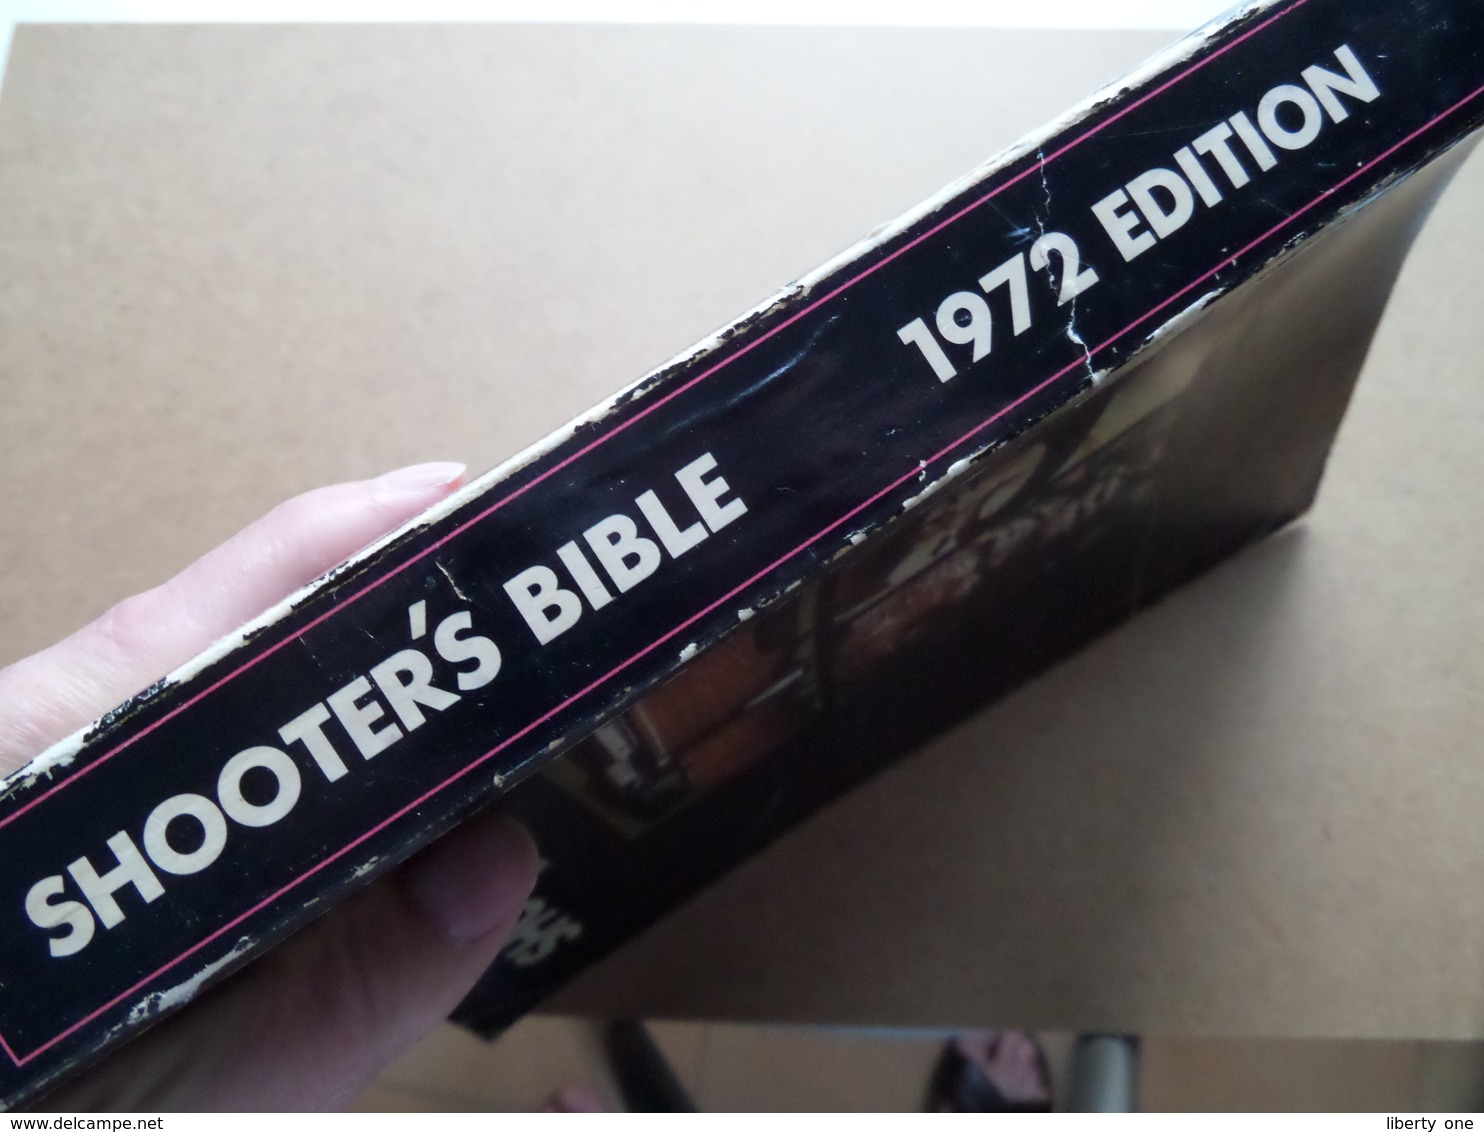 SHOOTER'S BIBLE World's Standard Firearms Reference Book ( N° 63 - Edition 1972 / Stoeger ) Older Book ! - Books On Collecting